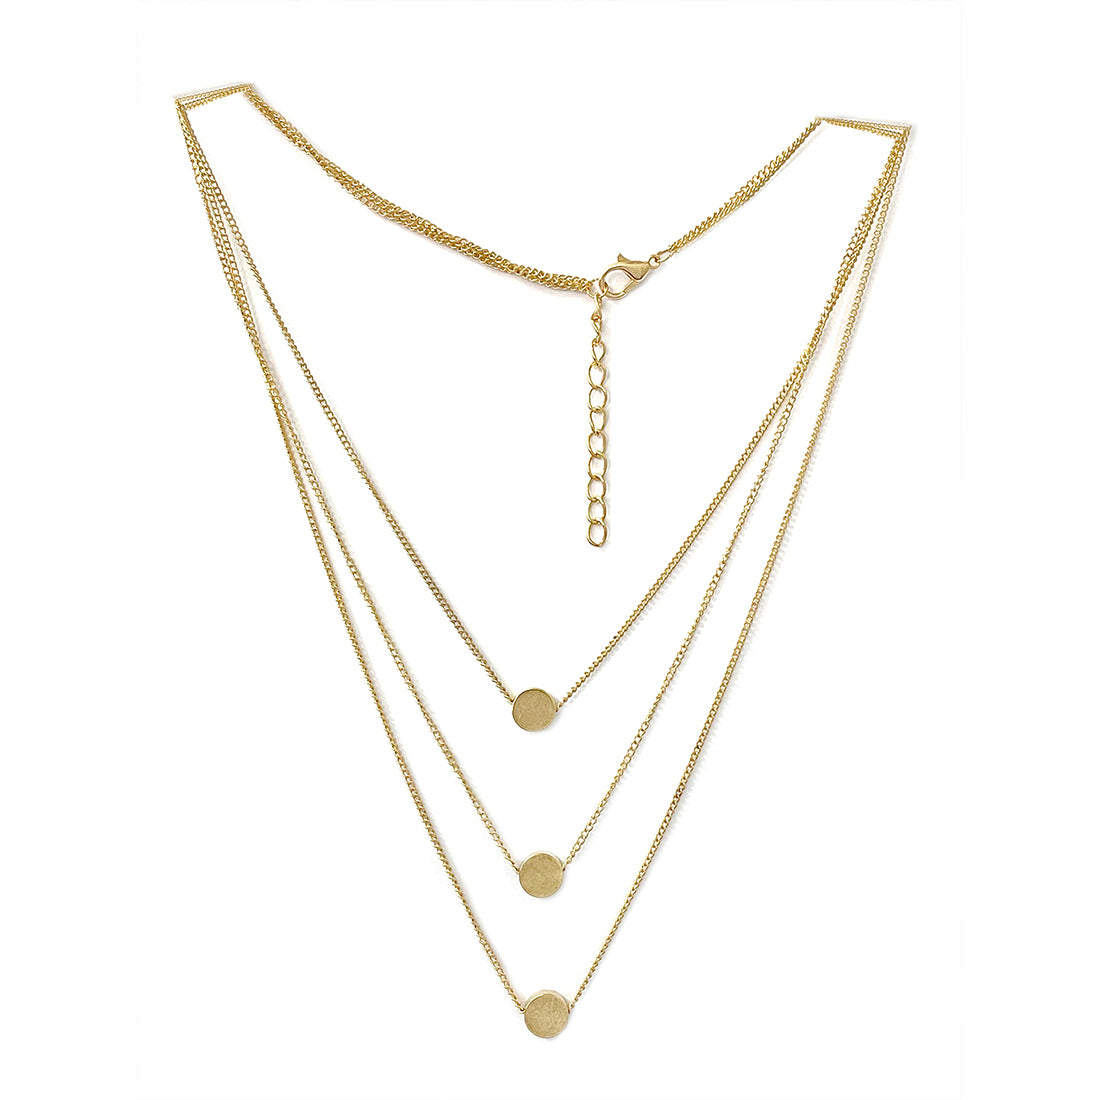 CIRCLE PENDANT STATEMENT GOLD-TONED LAYERED NECKLACE